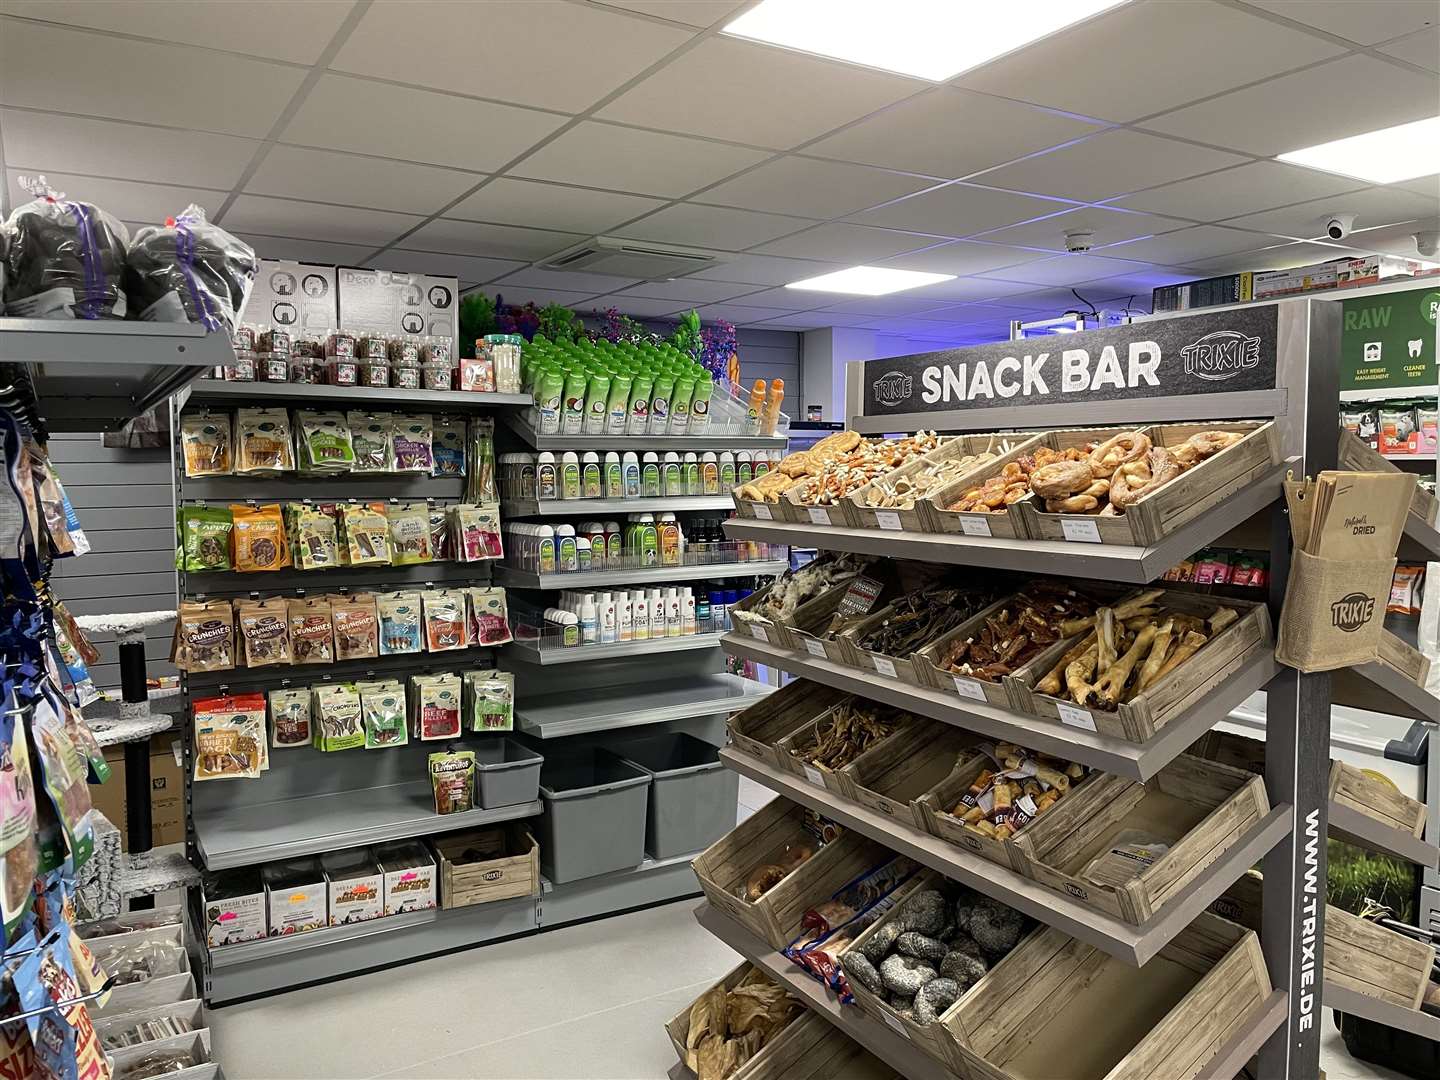 The shop's new-look interior